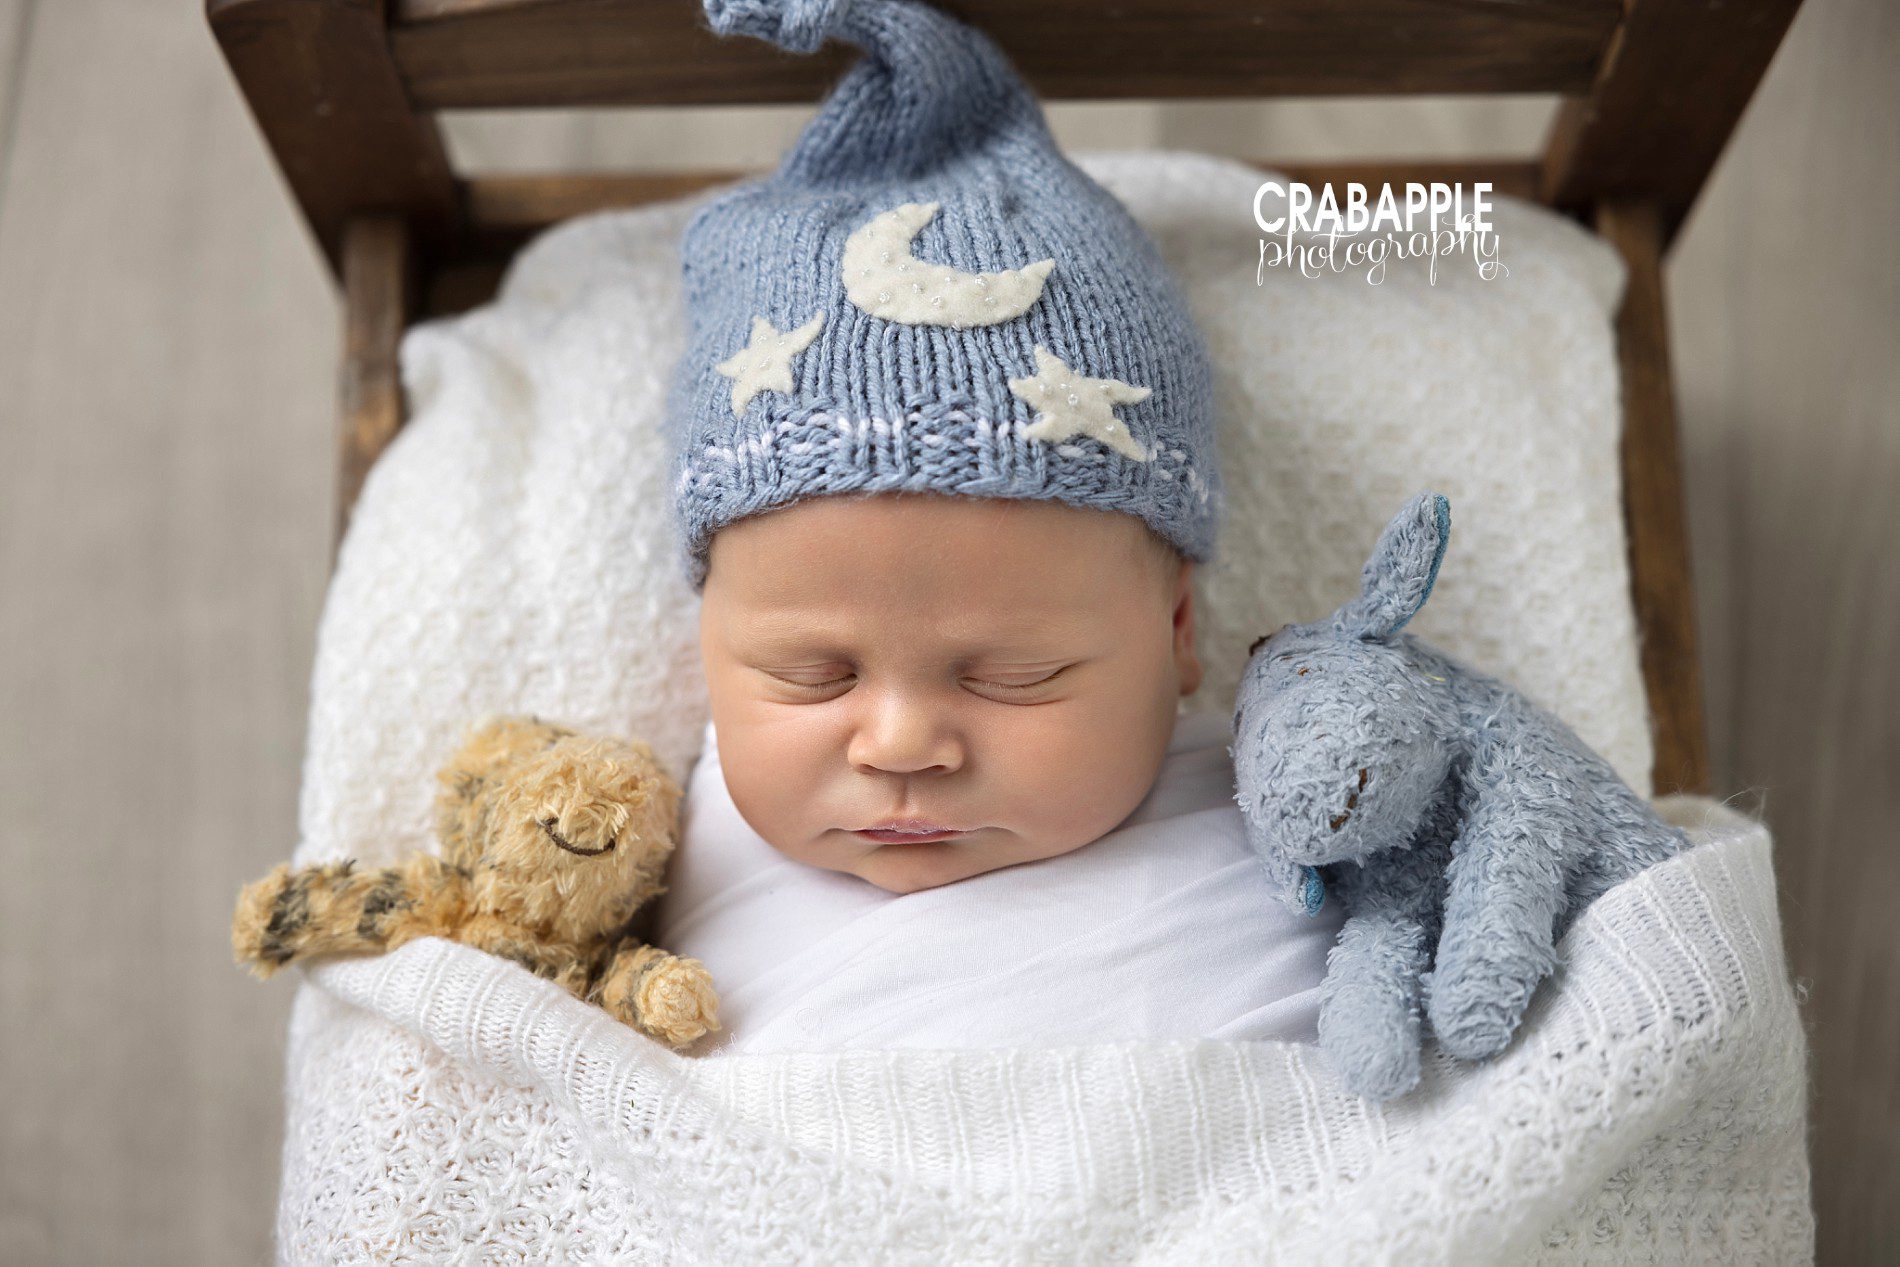 newborn photos using a bed for a prop